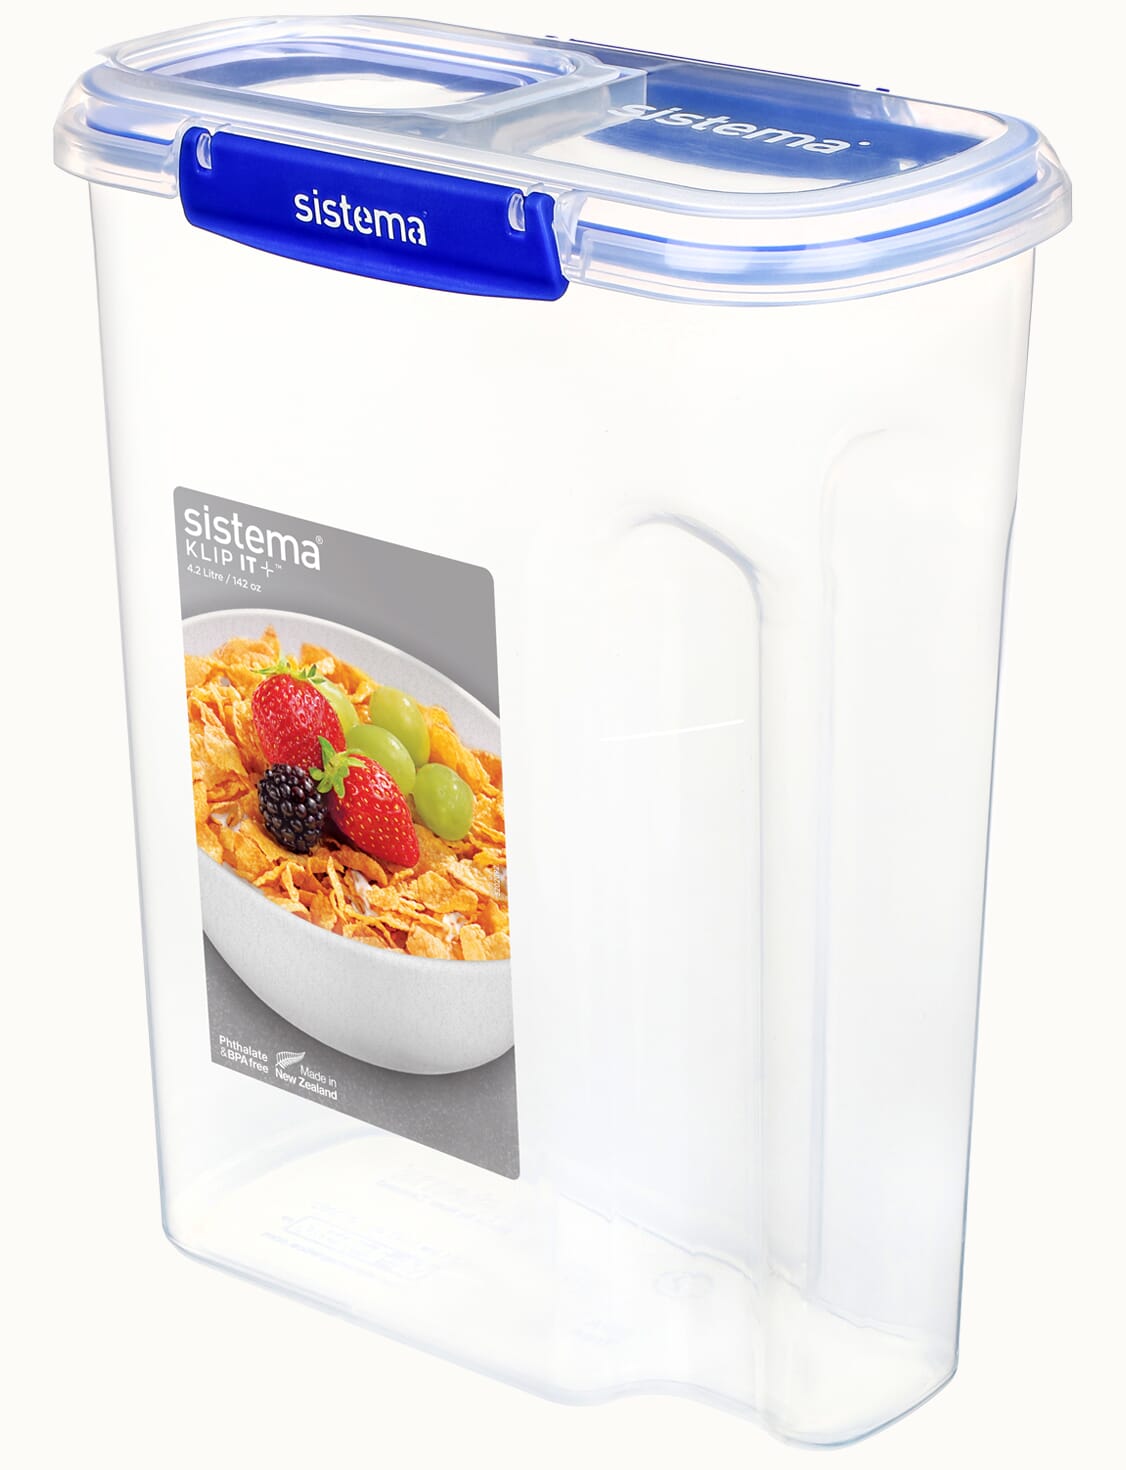 Sistema Klip It Plus Food Storage Container | 5.5 L Square | Stackable & Airtight Fridge/Freezer Food Boxes with Lids | Recyclable with TerraCycle